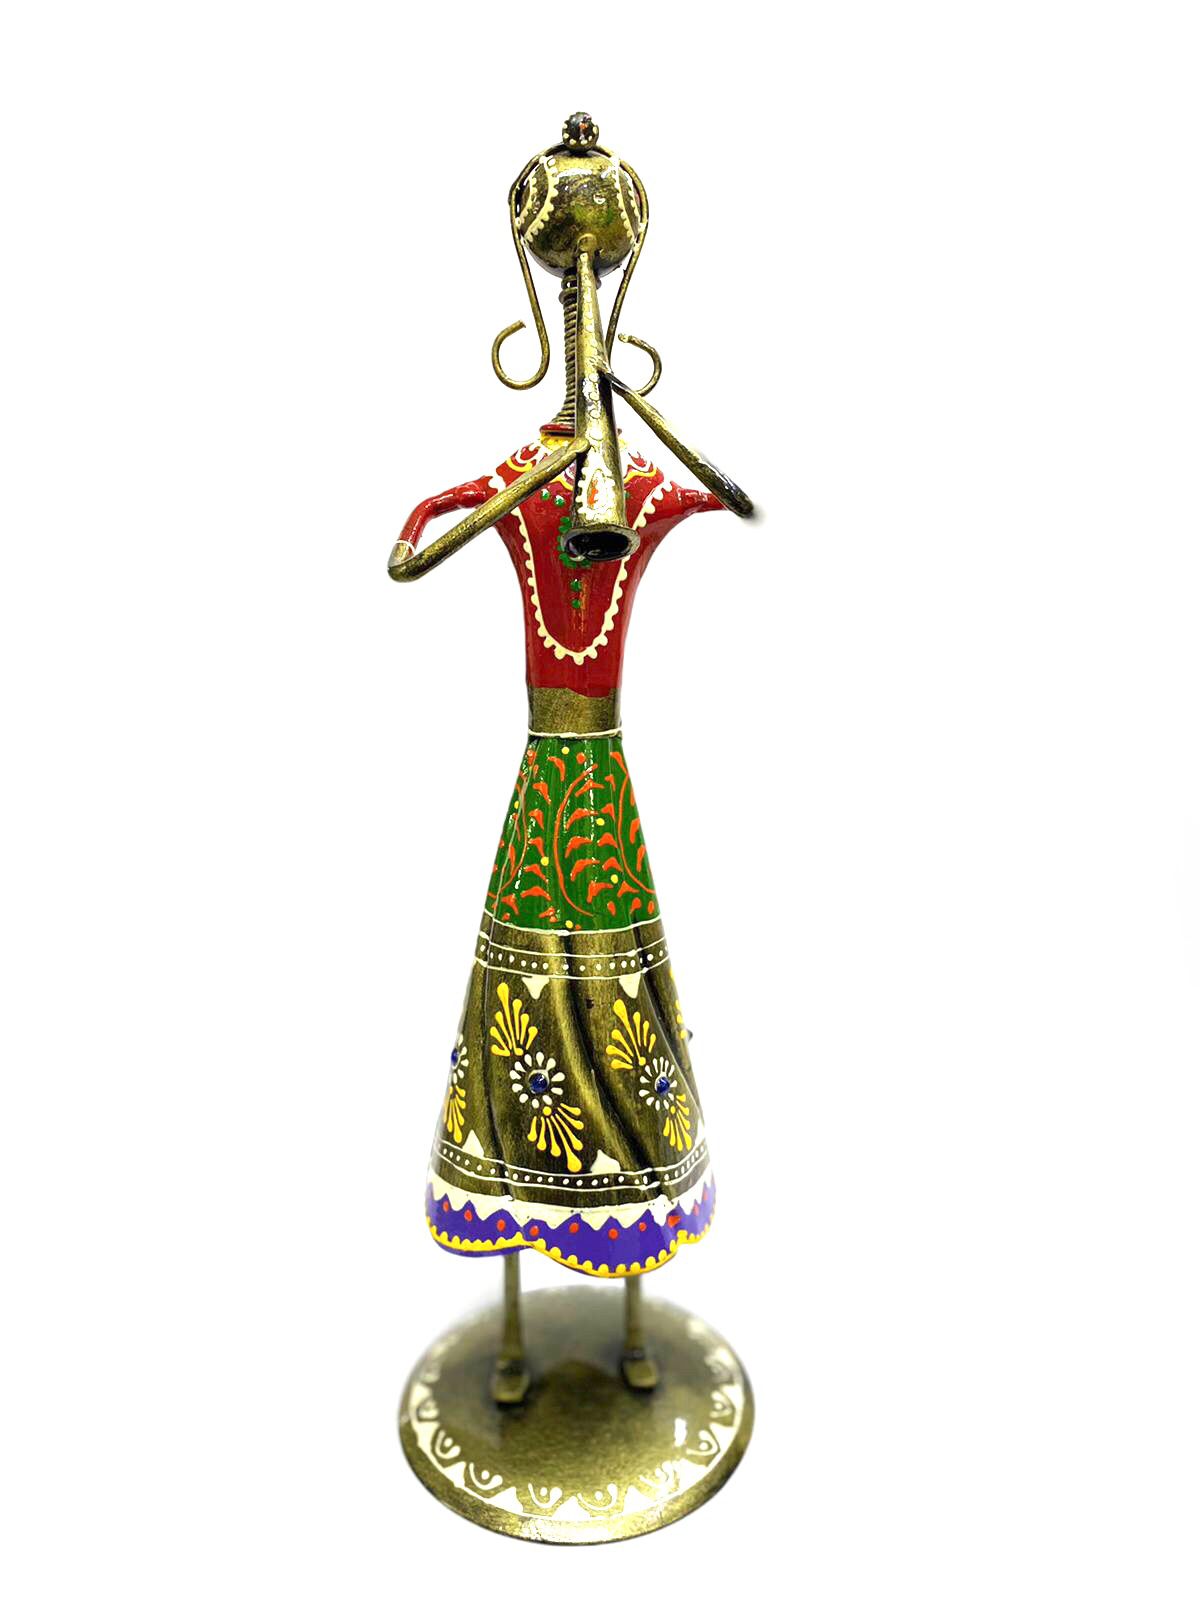 Lady Musician With Indian Attire Extraordinary Metal Creations By Tamrapatra